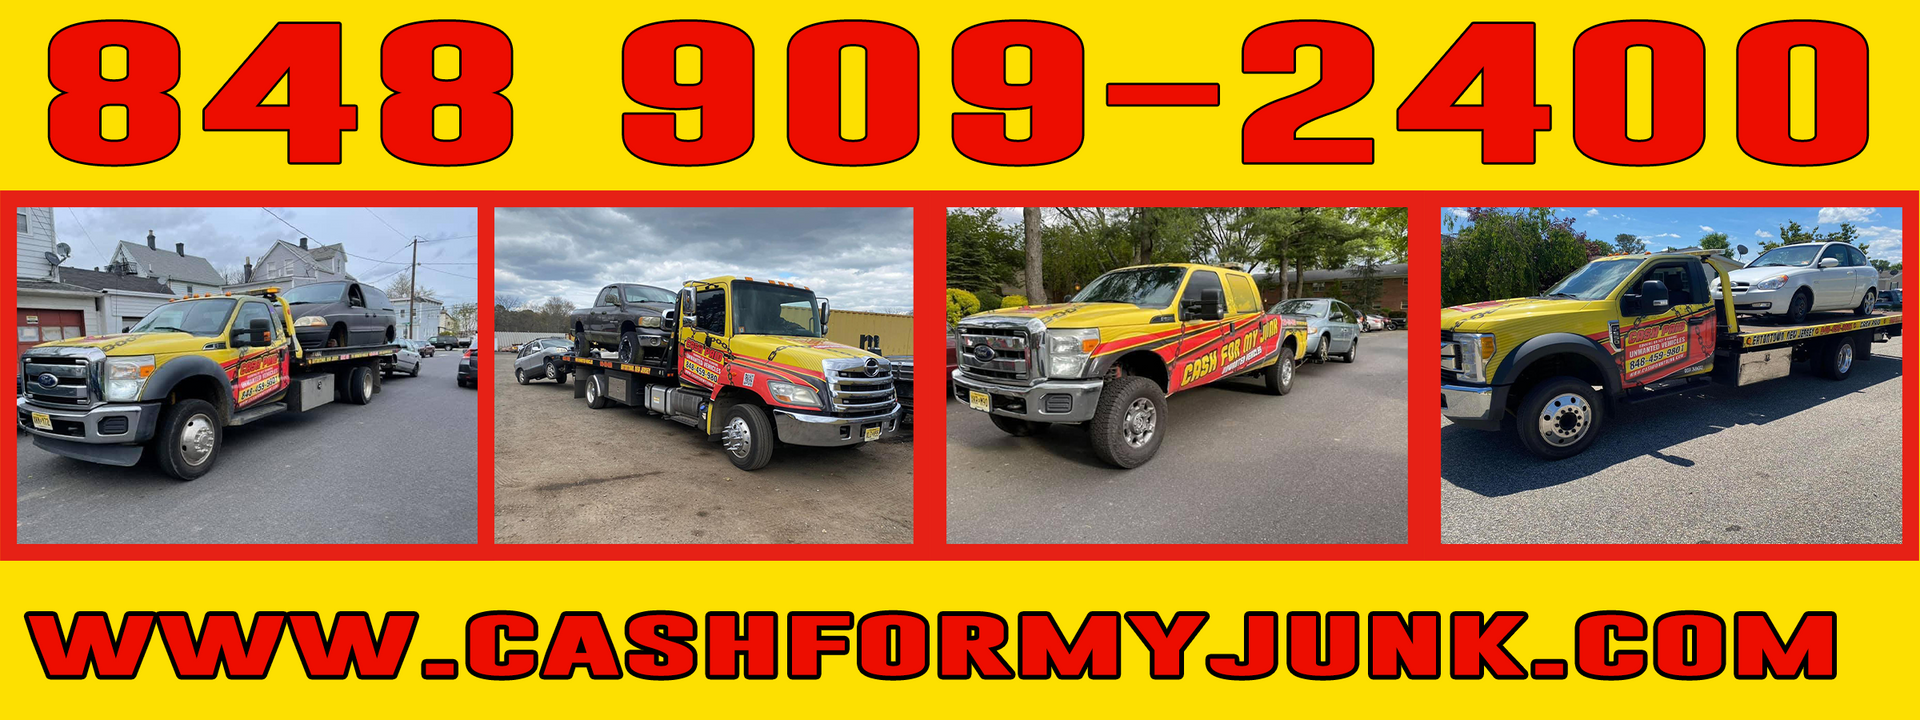 Cash For My Junk Service Vehicle